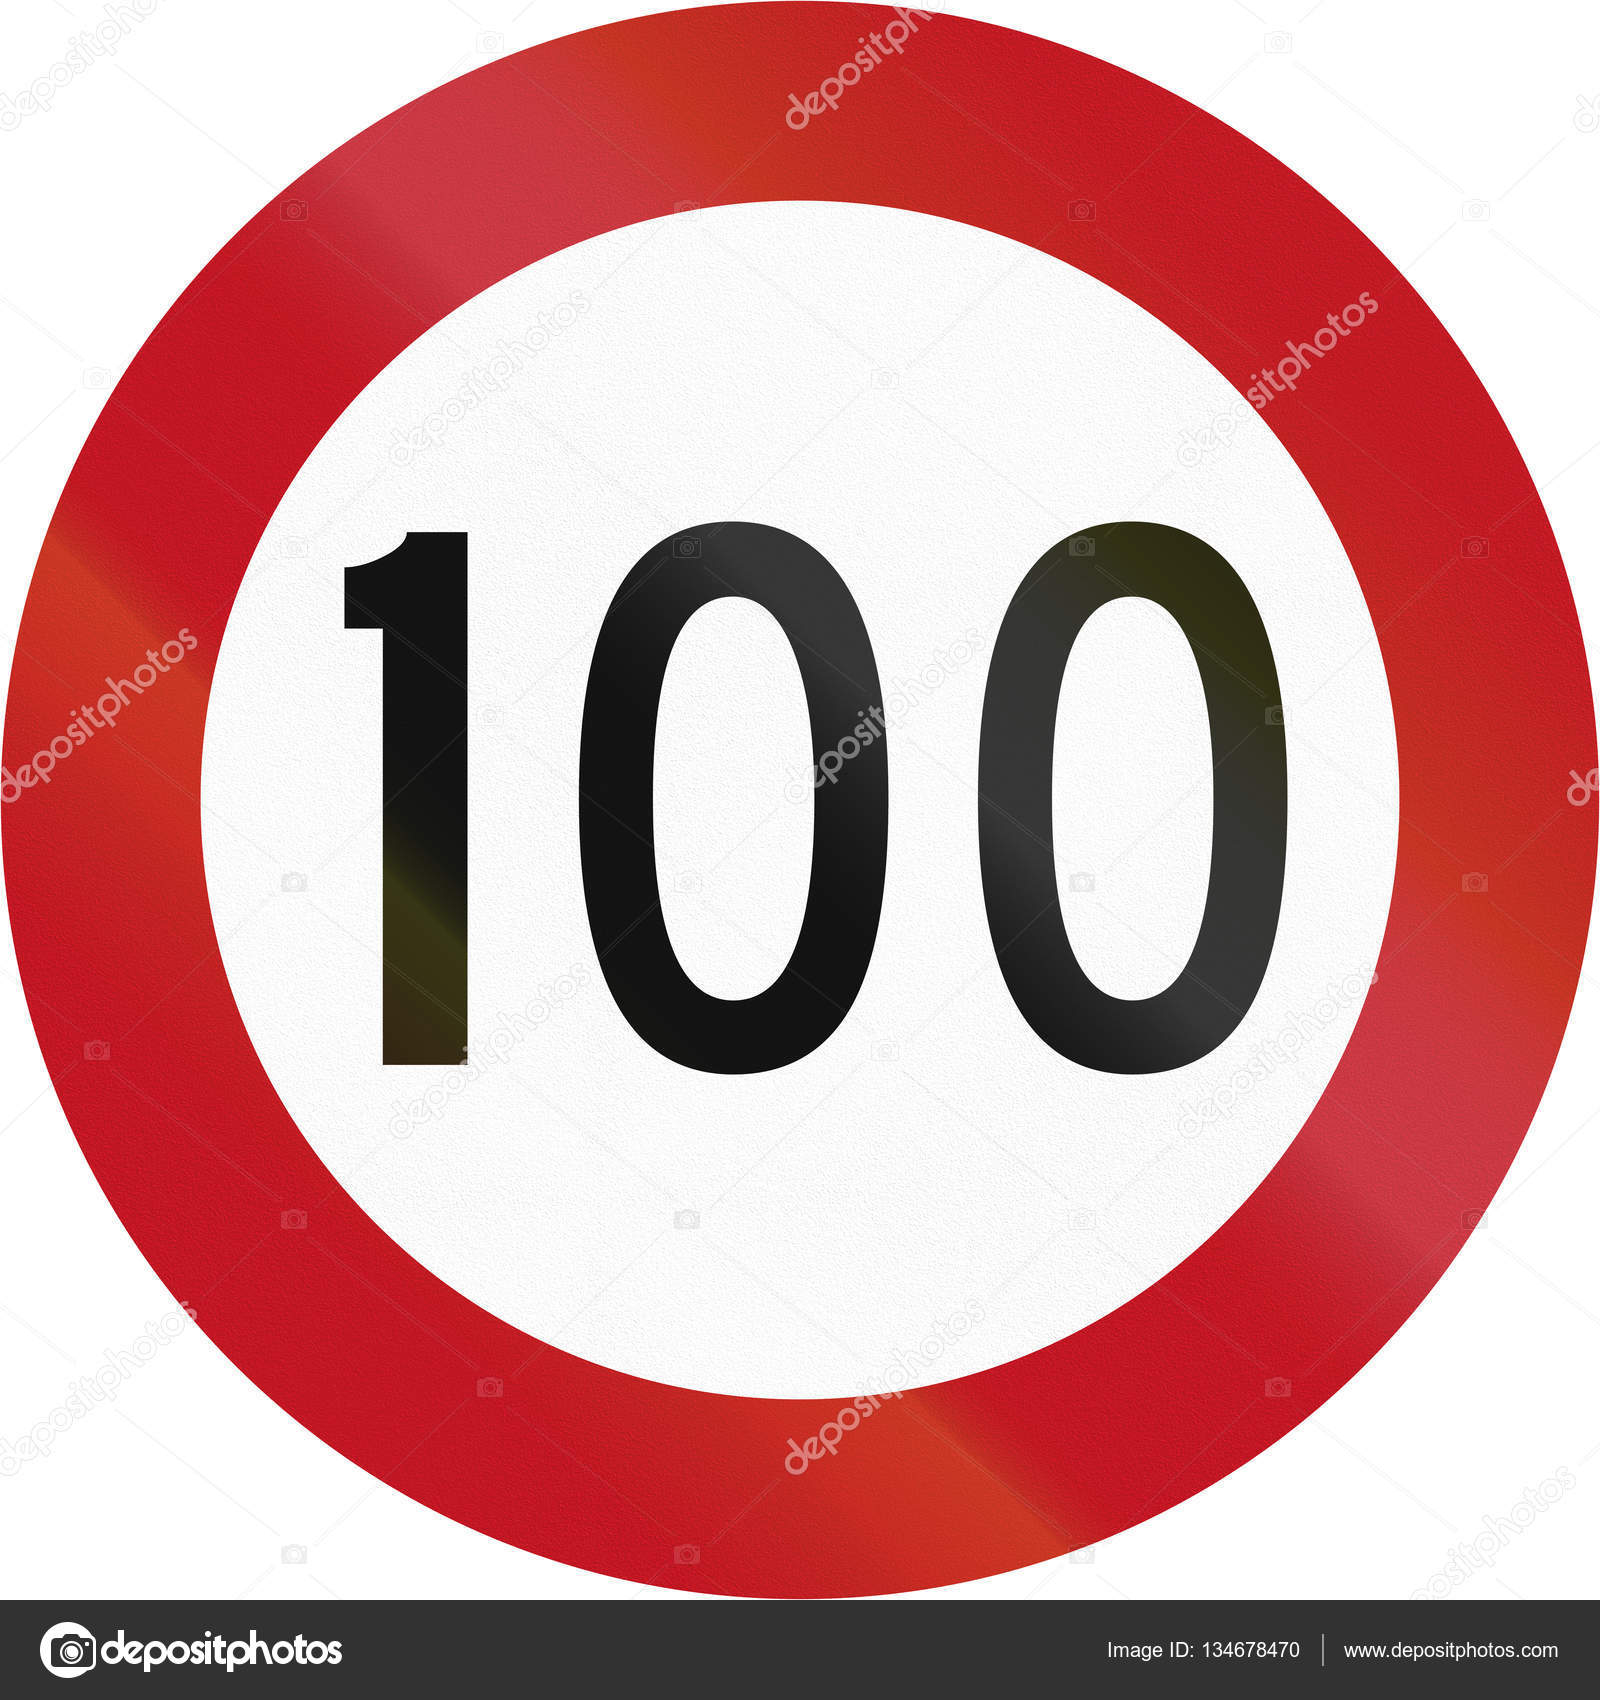 New Zealand road sign RG-2: 100 kmh limit. This is the maximum legal ...